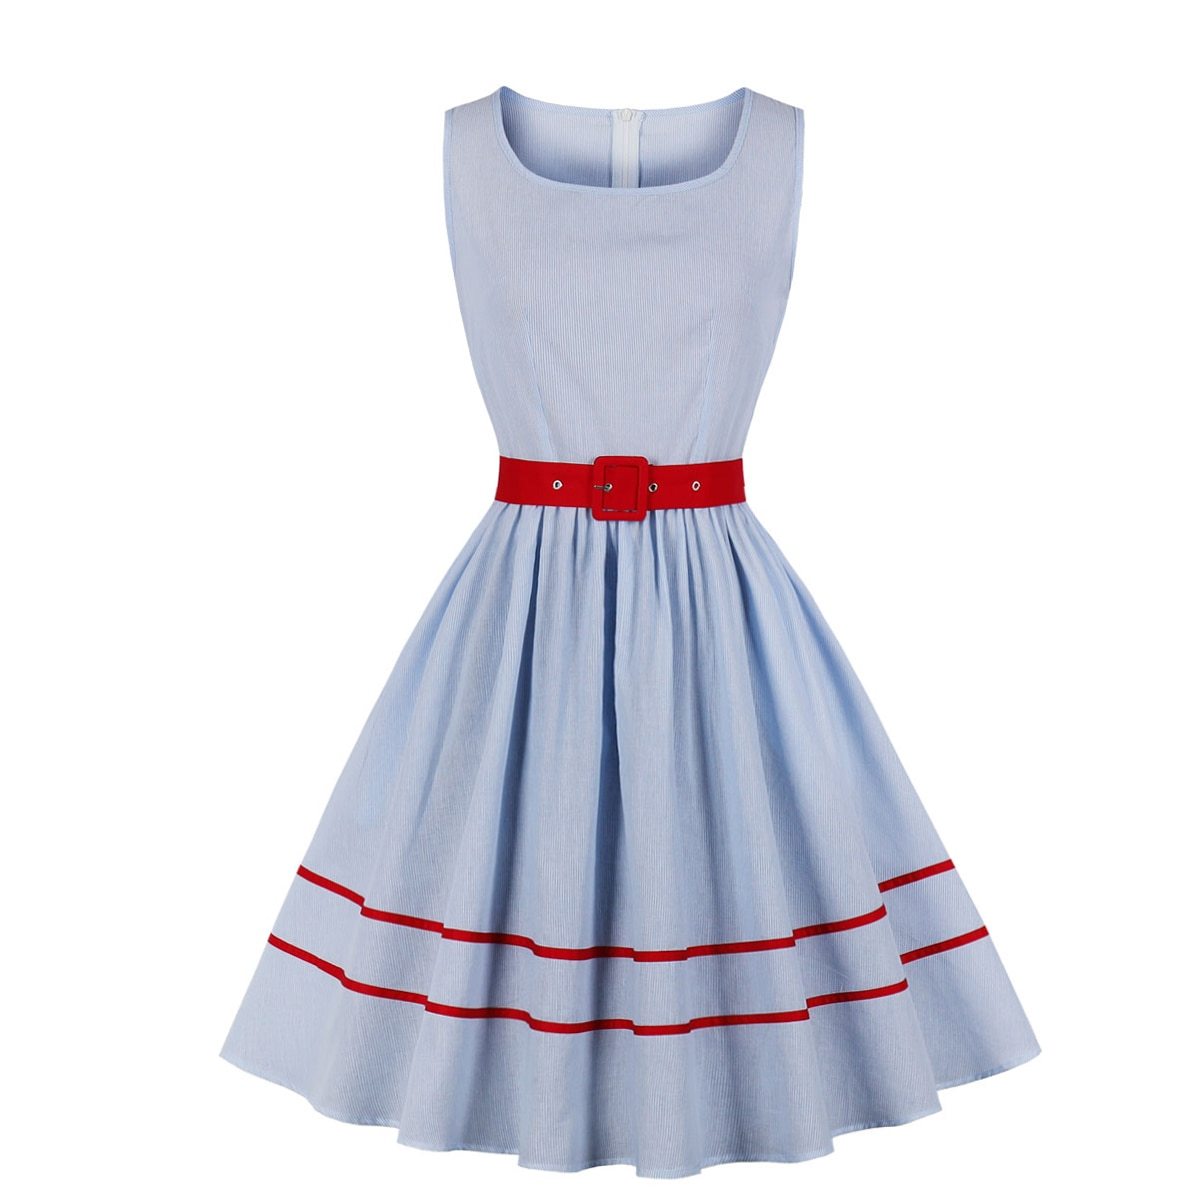 2021 O-Neck Sleeveless 50s Striped Vintage Pleated Summer Dress 100% Cotton Women Pocket Side Red Belt Casual Ladies Dresses